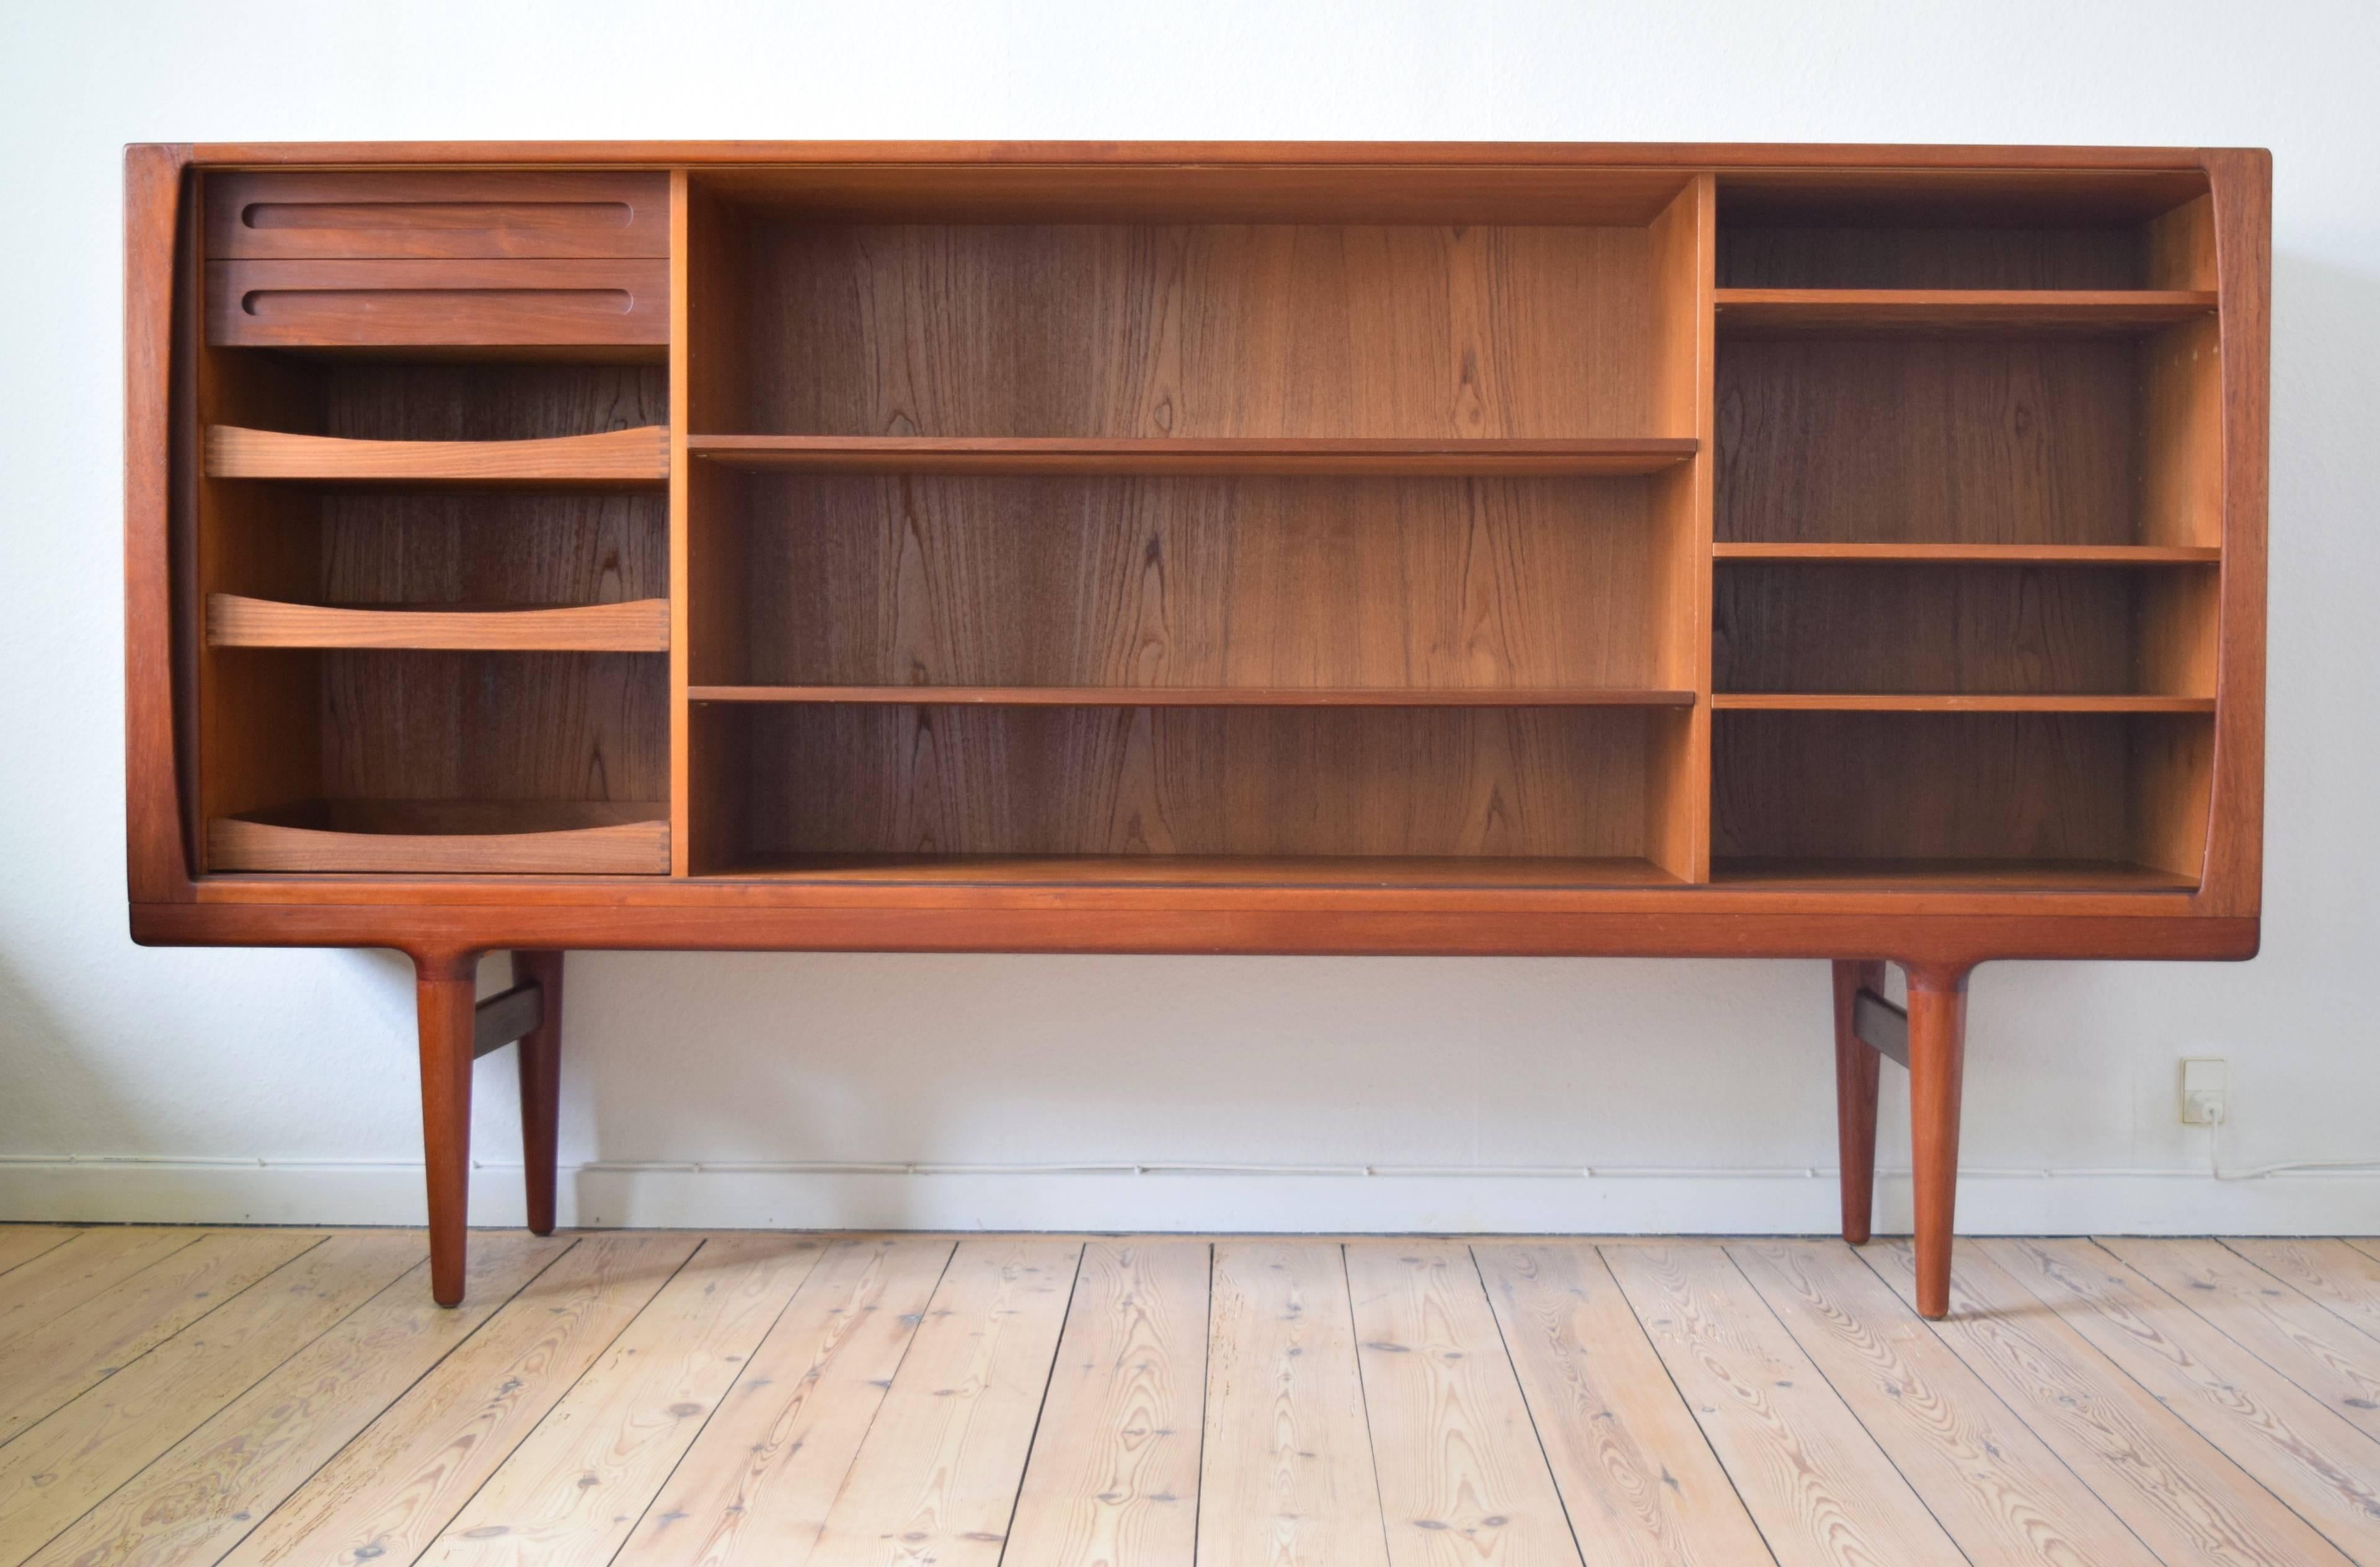 Danish high teak credenza from the 1960s featuring four sliding doors with matched teak grain, interior shelves and drawers. An elegant solid teak bevelled edge moulds in to elegant tapered legs. This item has been restored and is in a very good